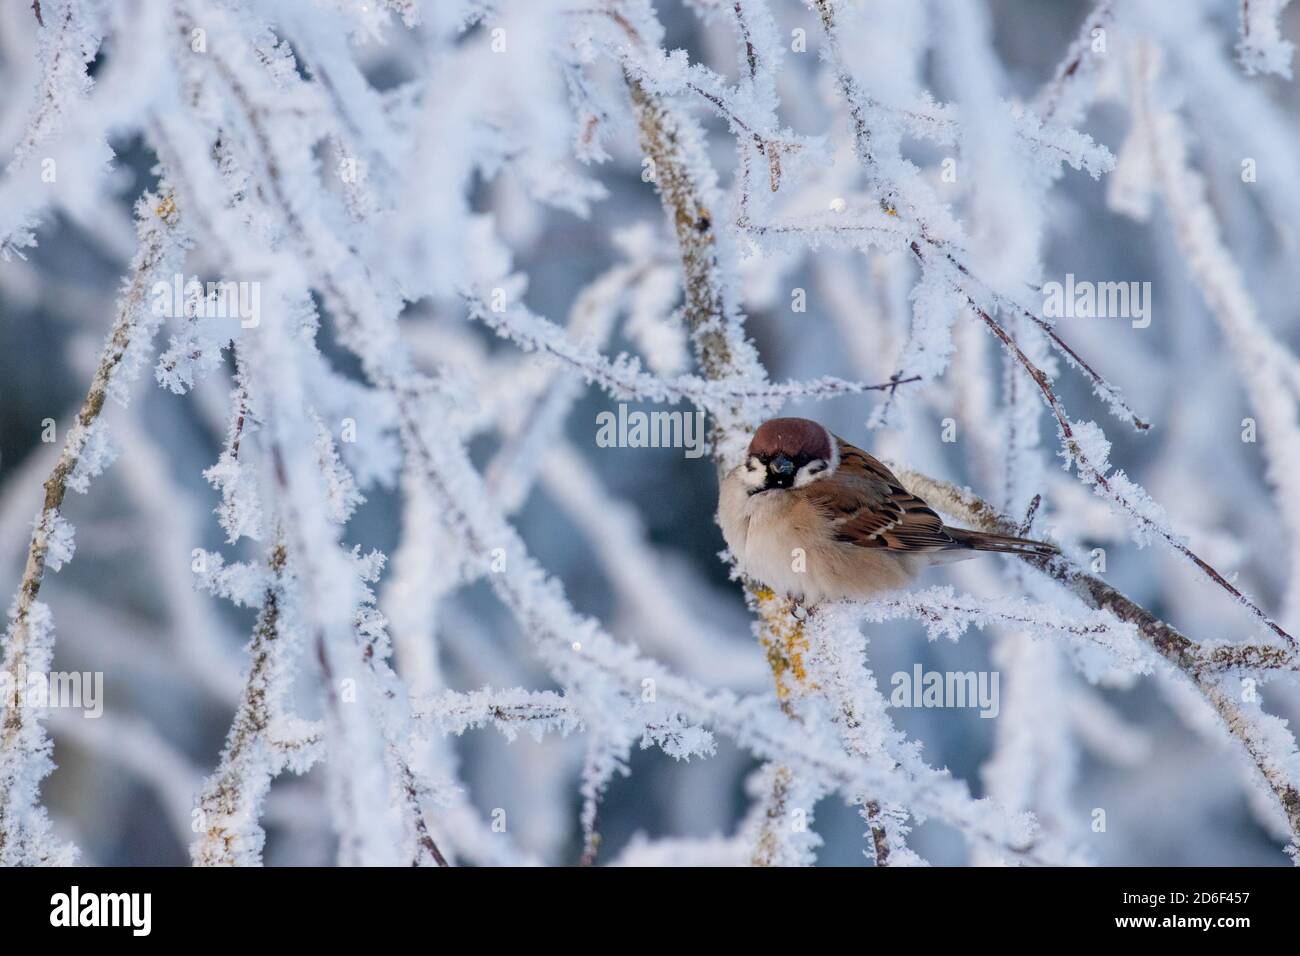 A small European songbird Eurasian Tree Sparrow, Passer montanus sitting on a frosty branch on a cold winter morning in Estonia. Stock Photo